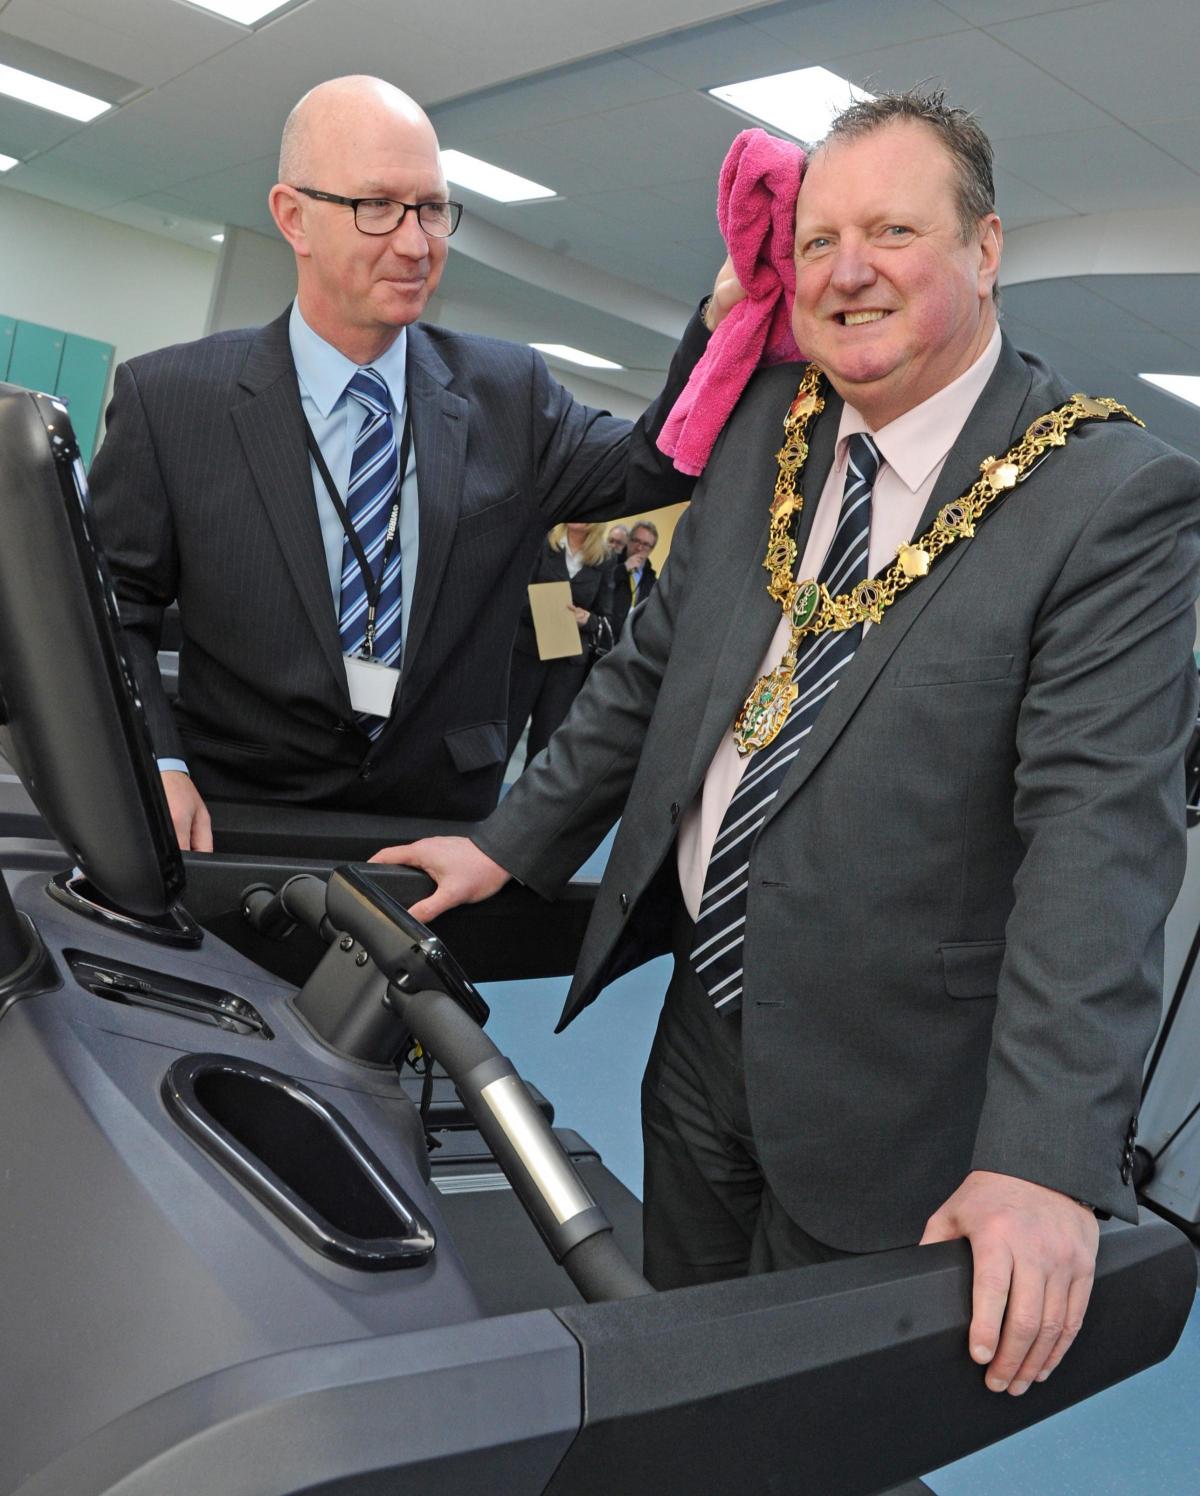 Wirral mayor Councillor Steve Foulkes tests out the equipment, pictured together with team leader, Martin Simmons